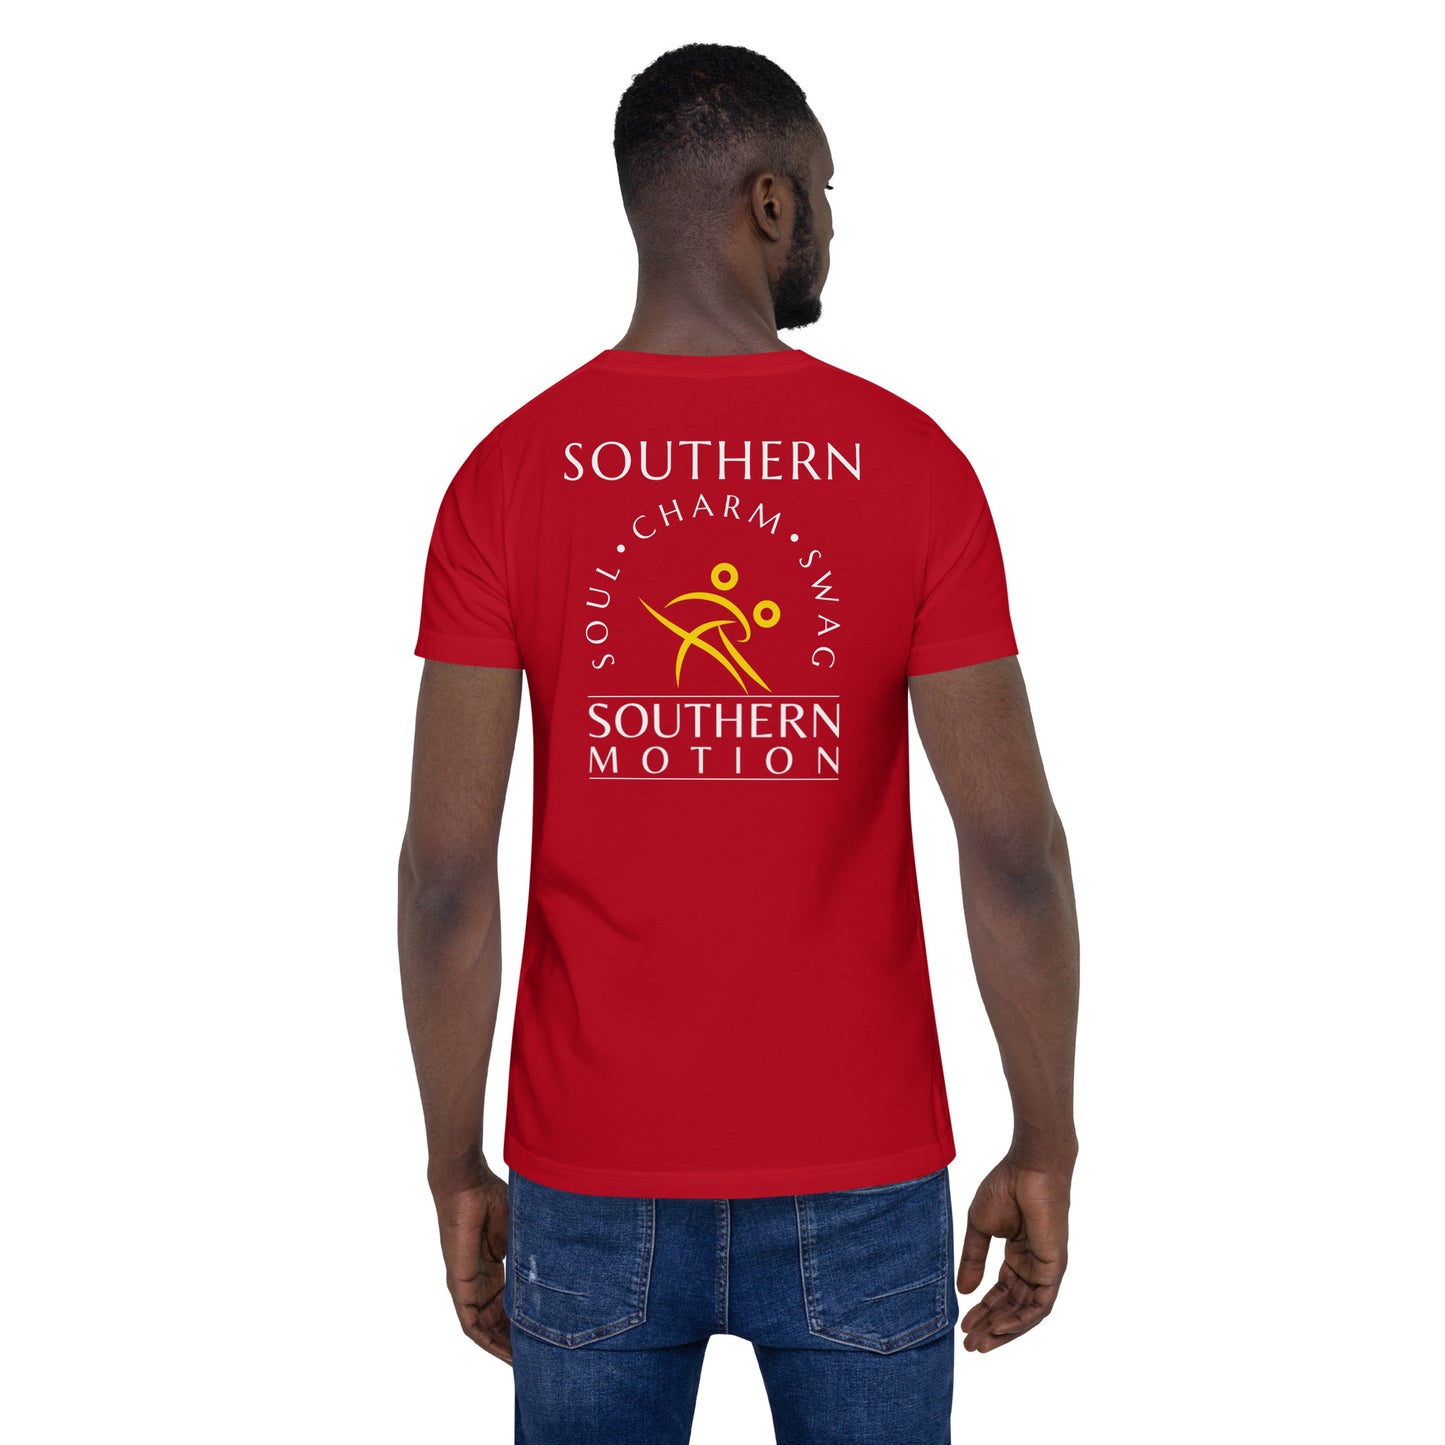 We are Southern Motion T-Shirt